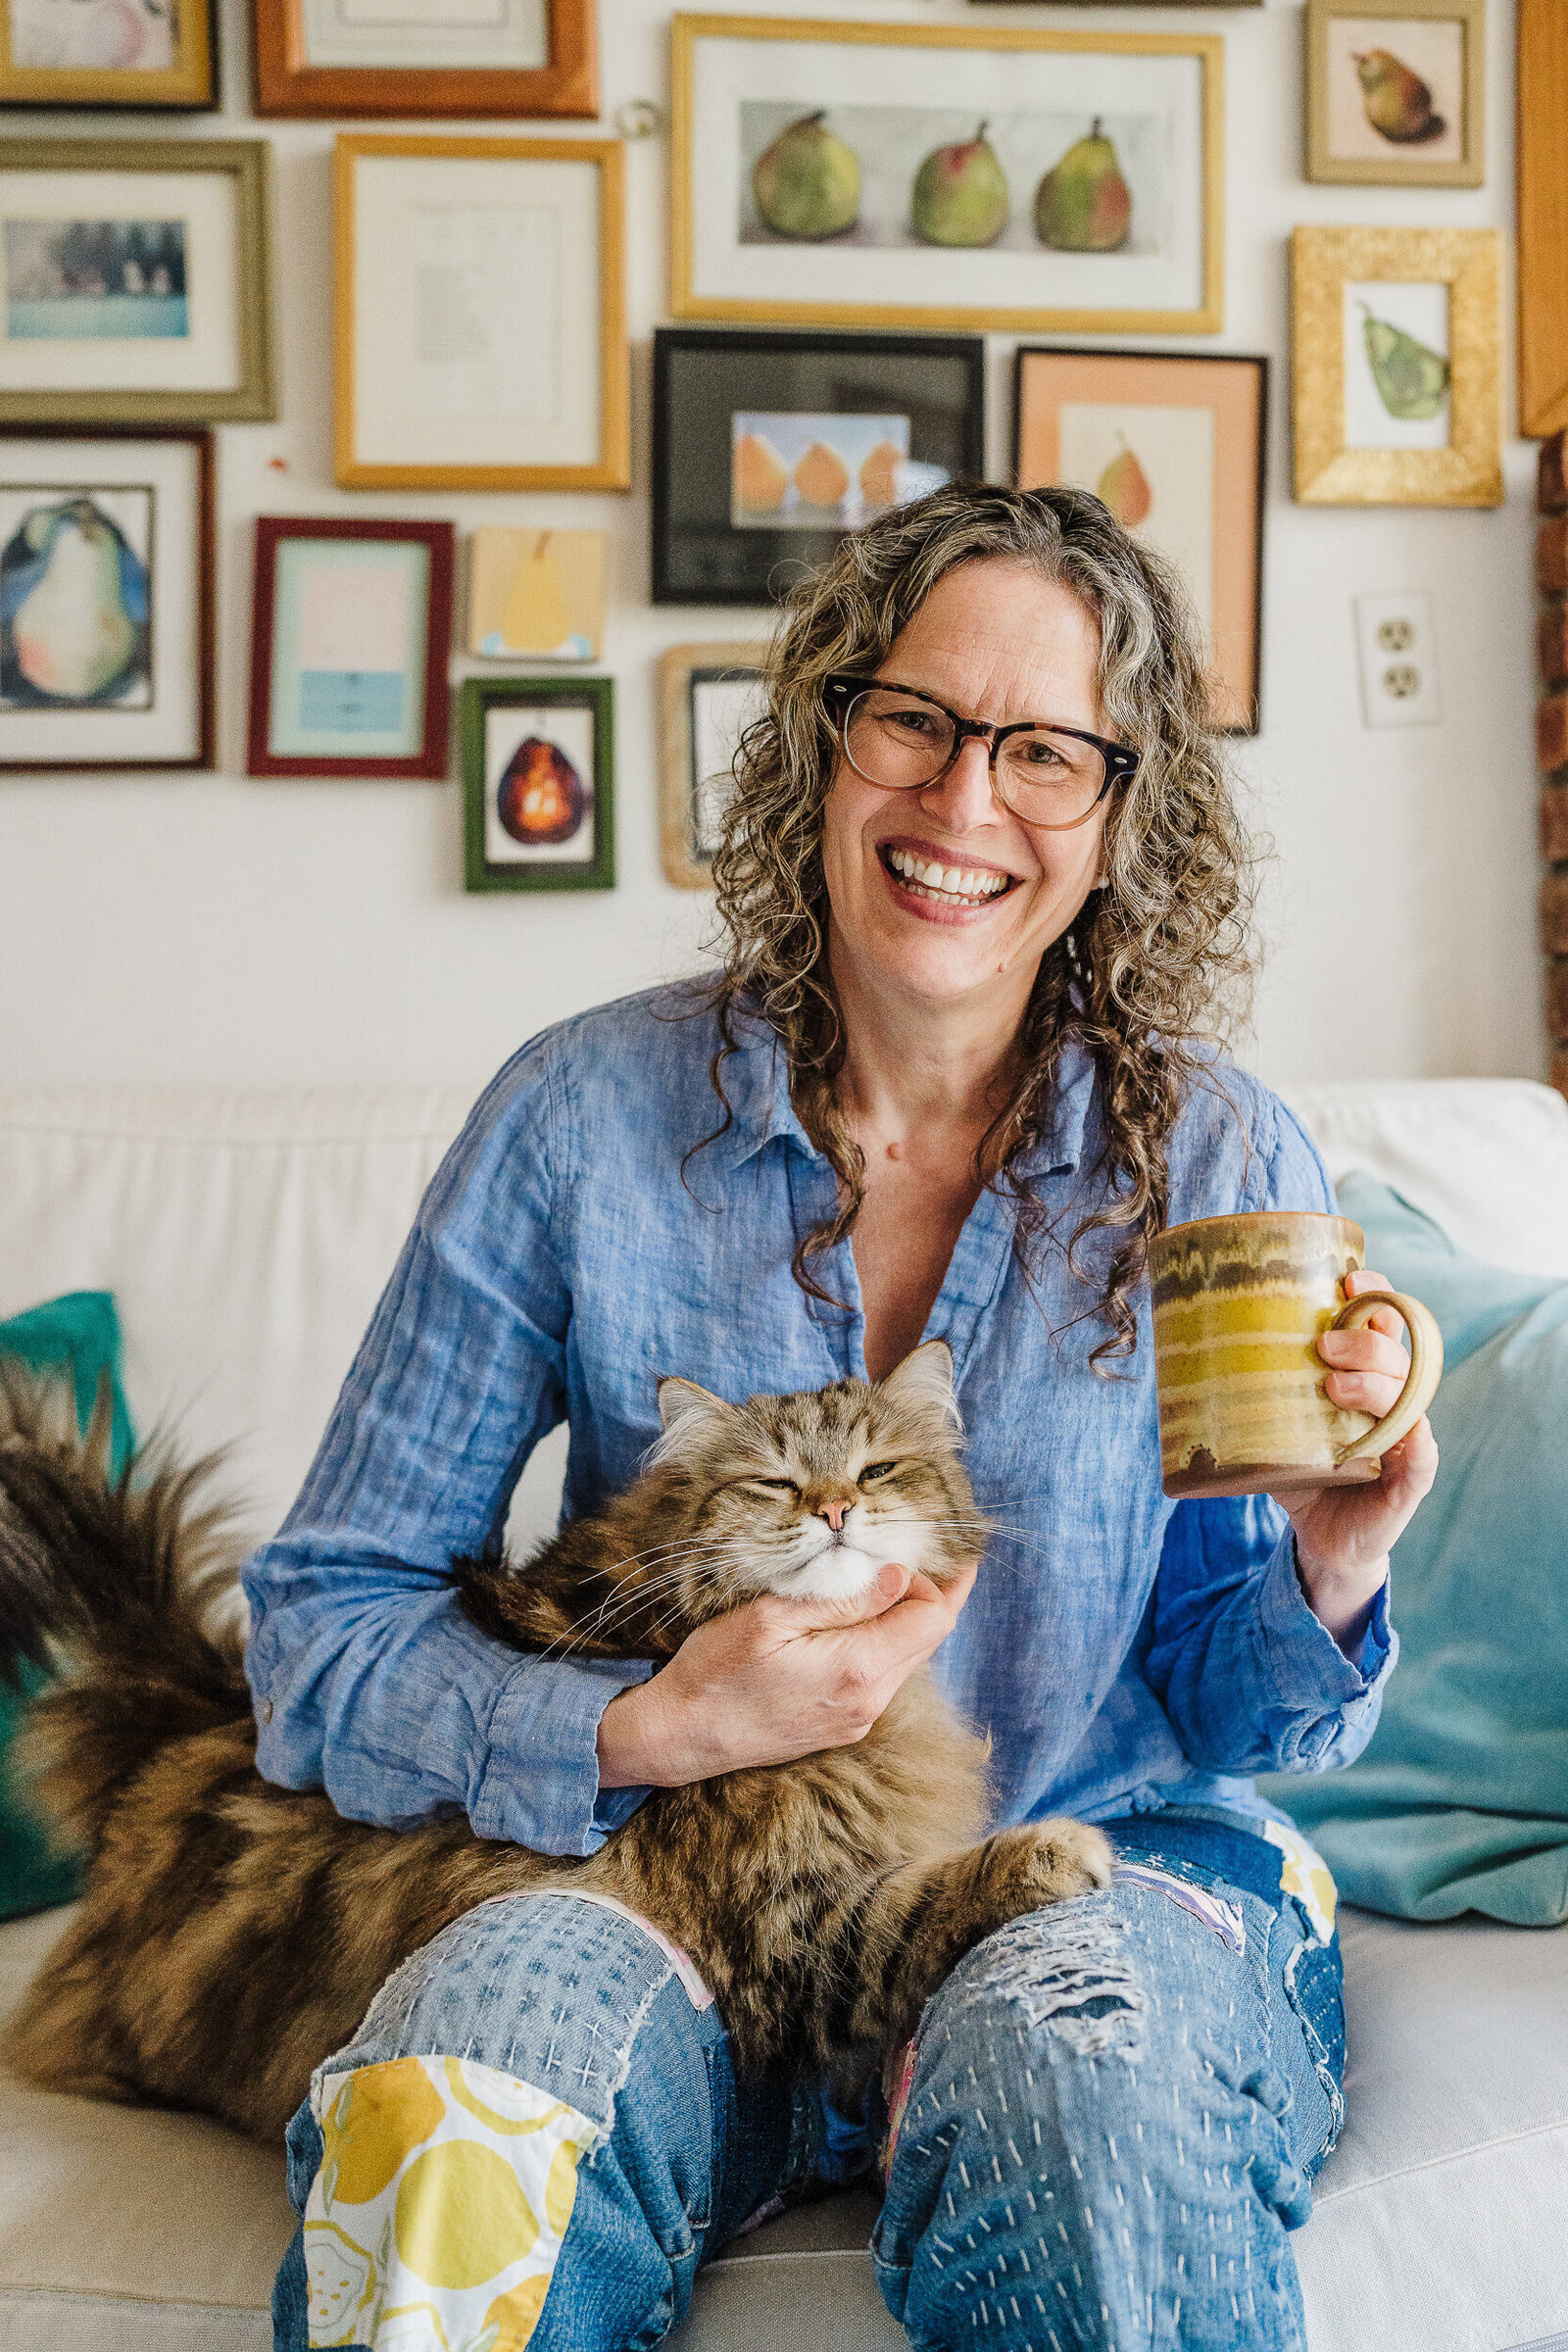 author smiles with cat and coffee mug